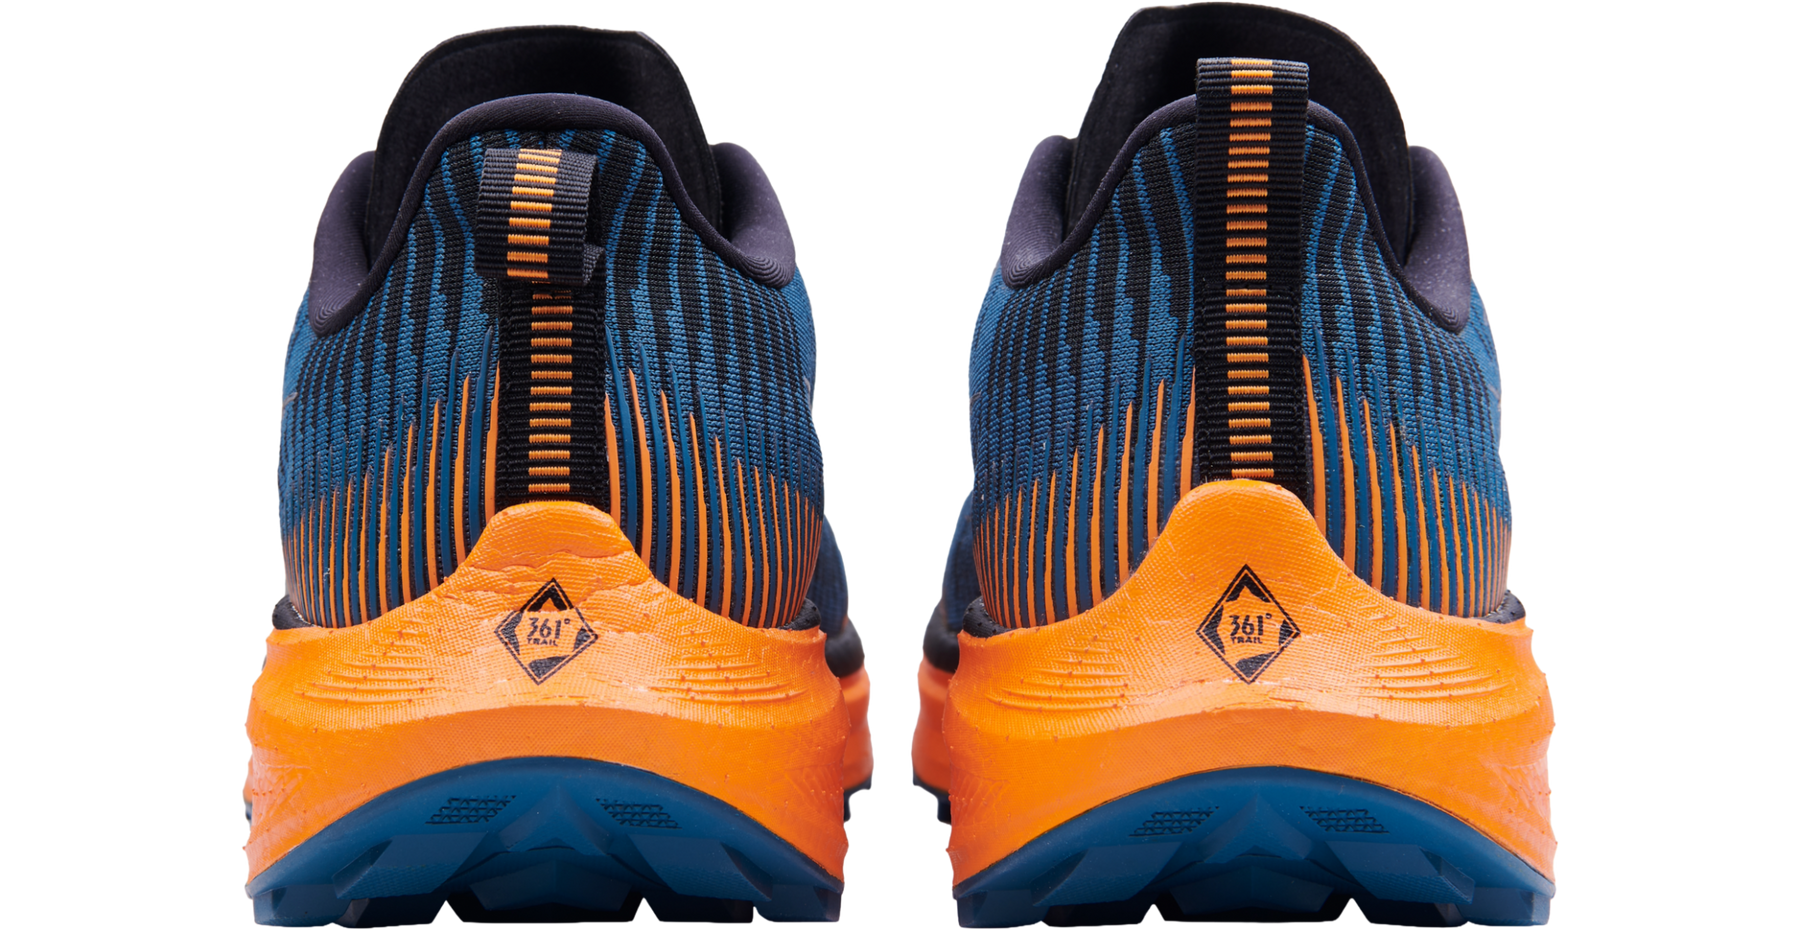 Road Trail Run: 361 Degrees Furious Future Multi Tester Review: Exotic,  Fast Only and a Great Super Shoe Value! 7 Comparisons